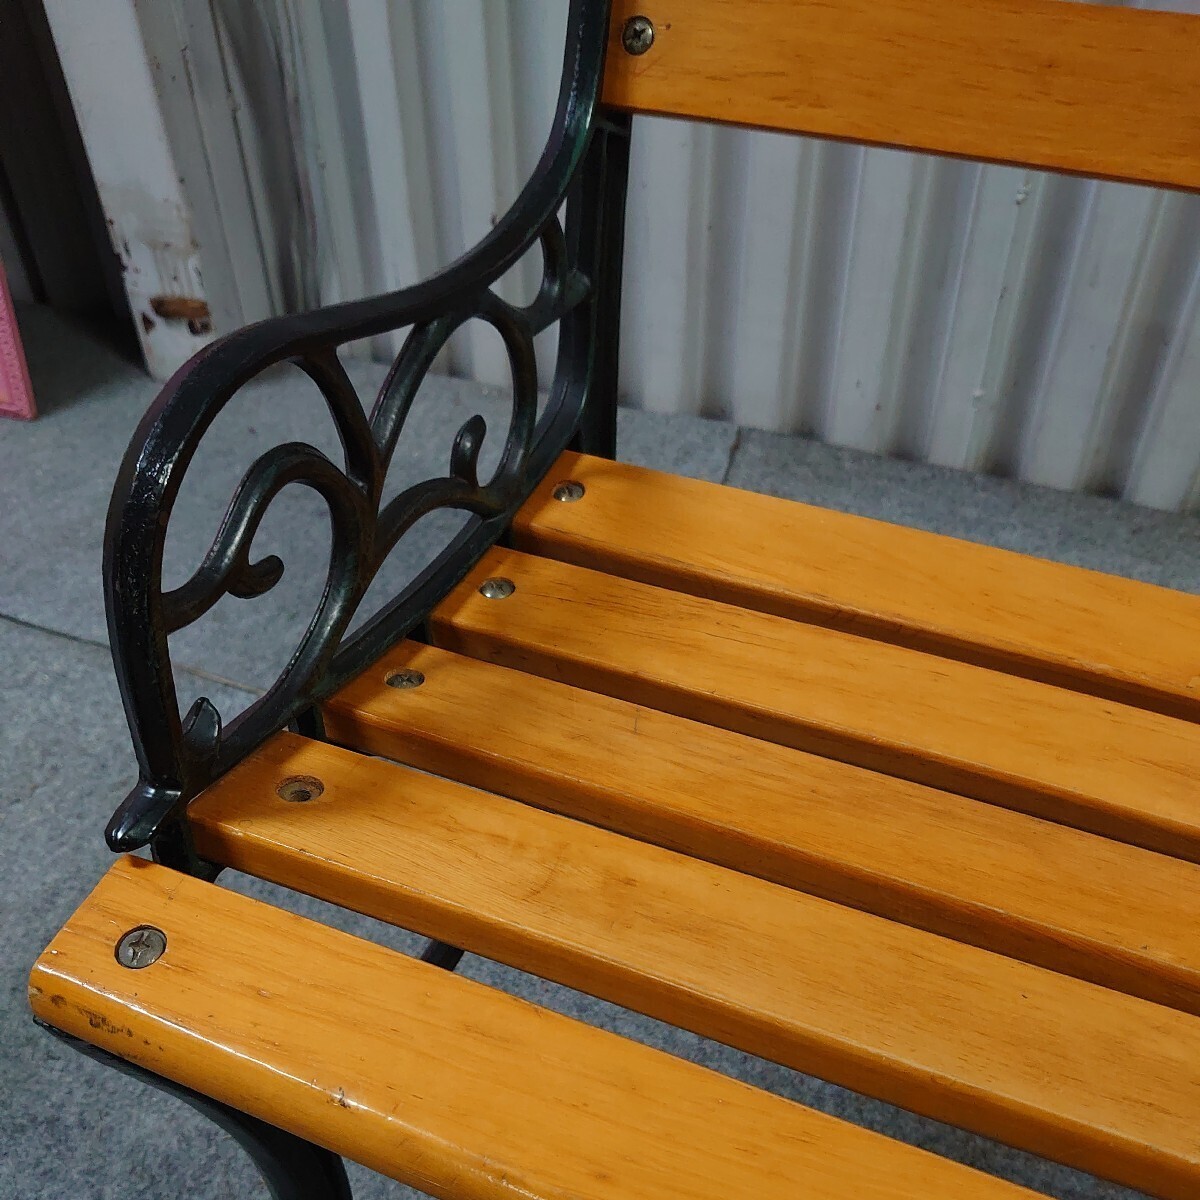  wooden bench garden bench chair - chair dining bench cheap selling out ..-.!